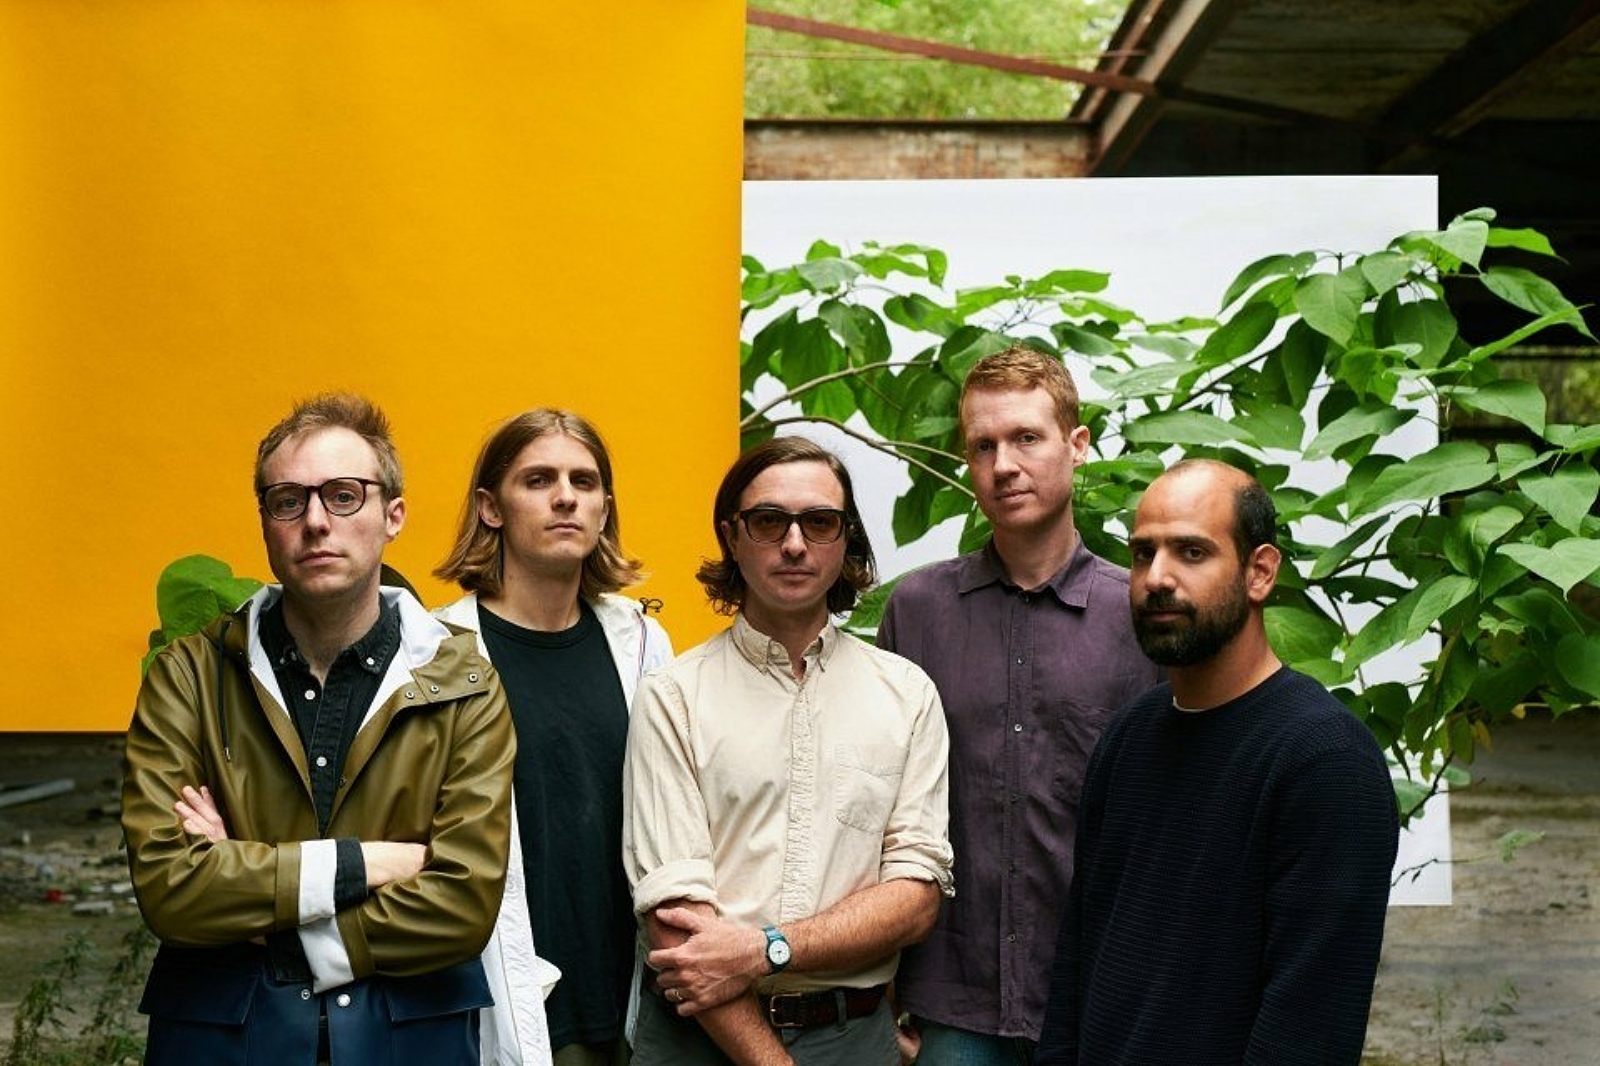 Real Estate announce new album 'The Main Thing'